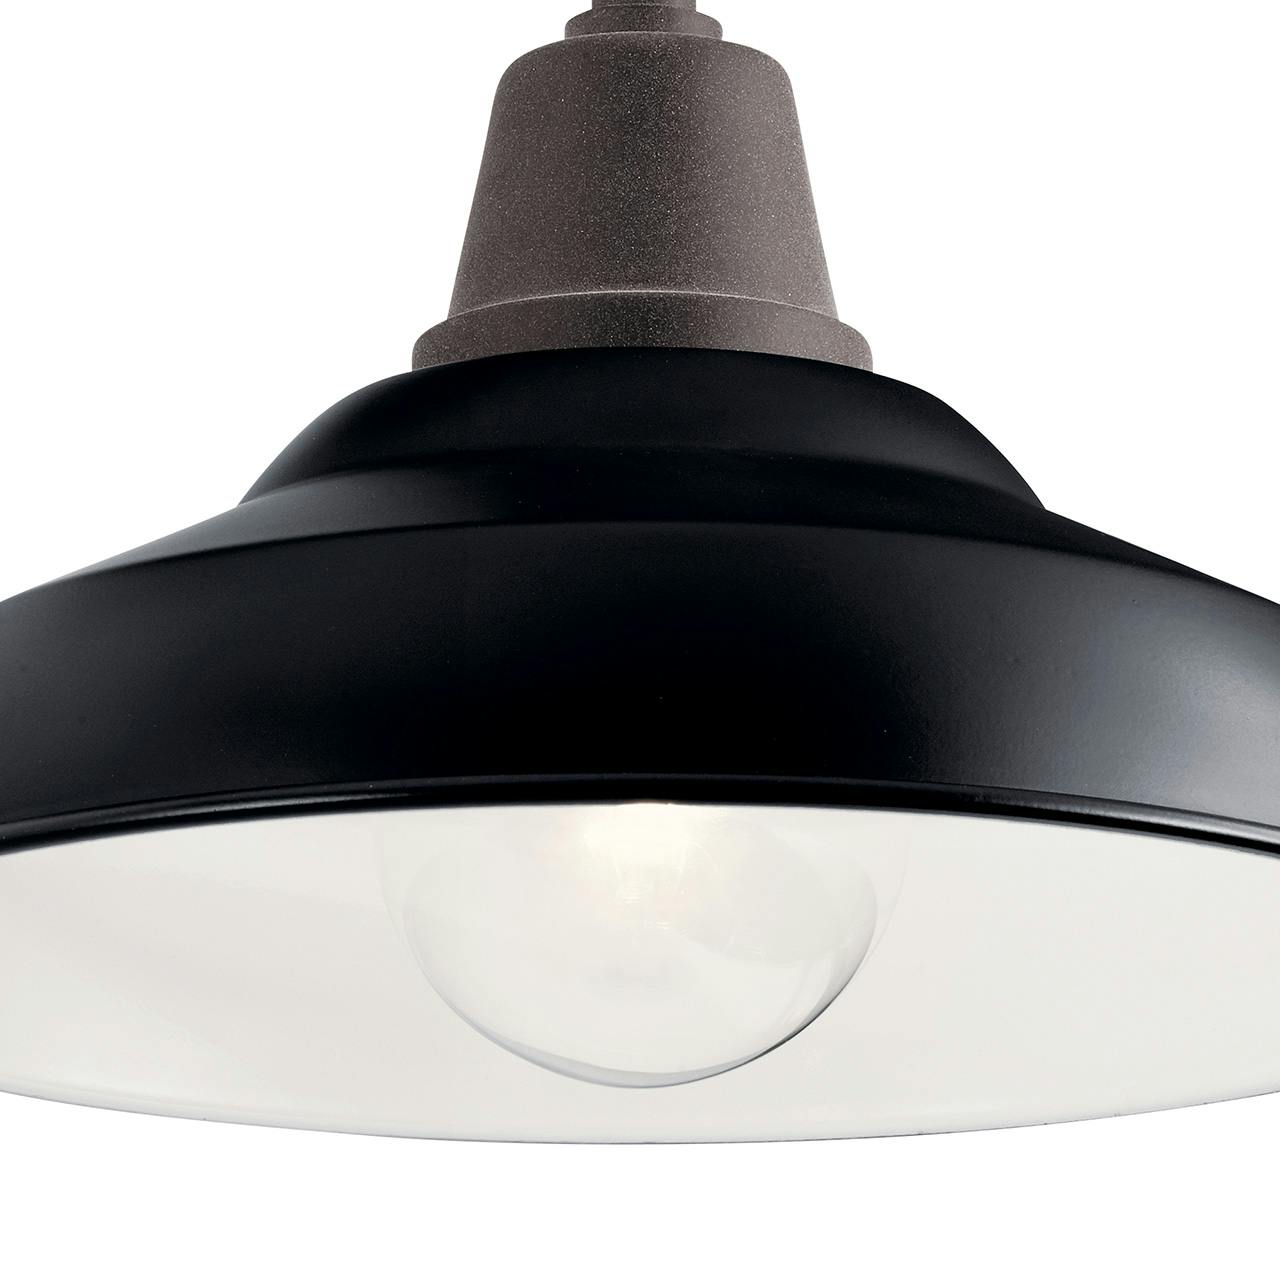 Close up view of the Pier 12" 1 Light Wall Light Black on a white background